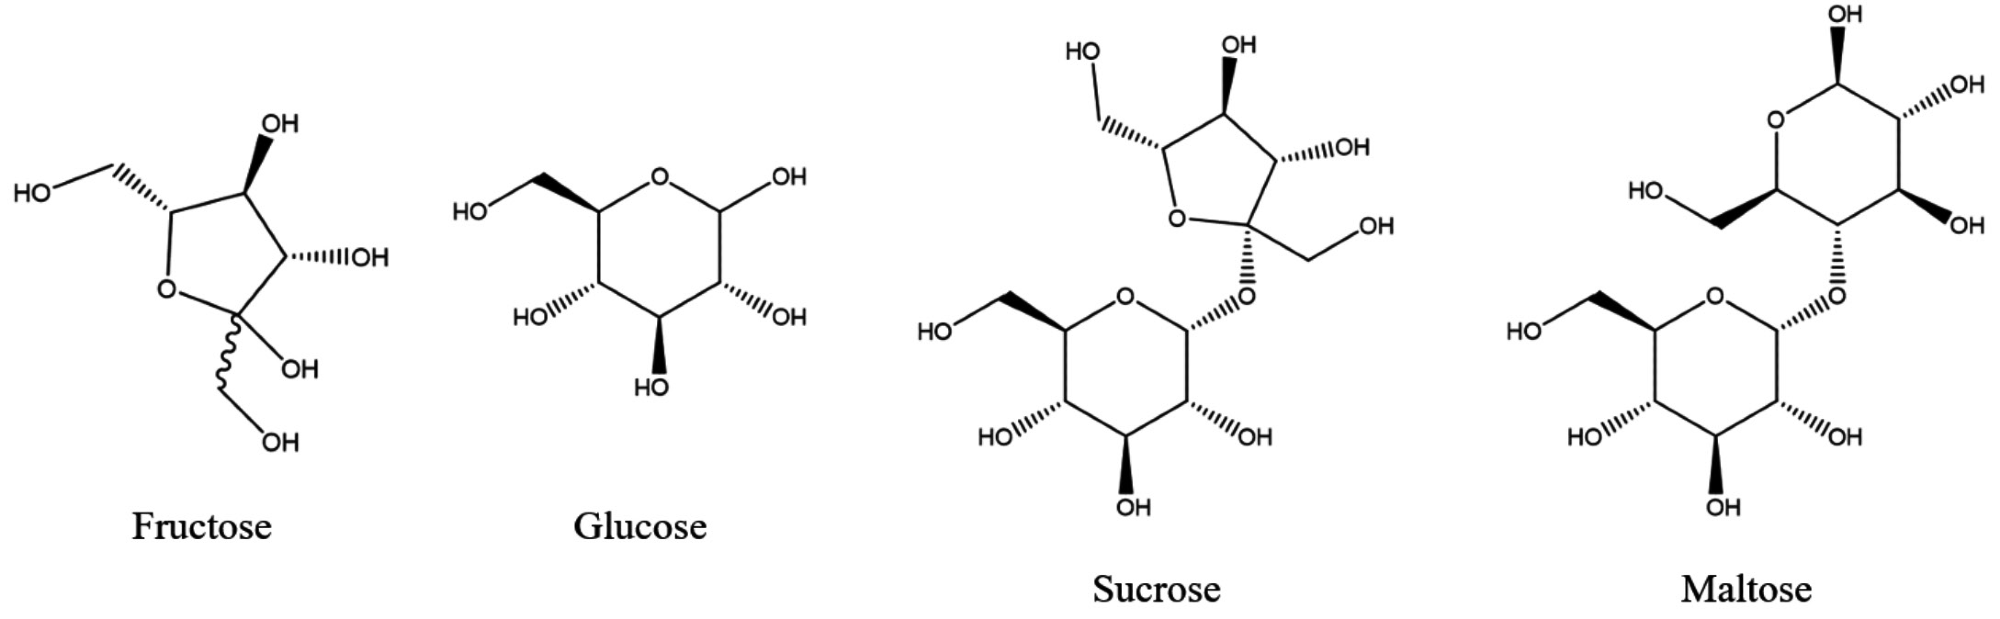 Chemical structures of the four sugars analyzed in this study.